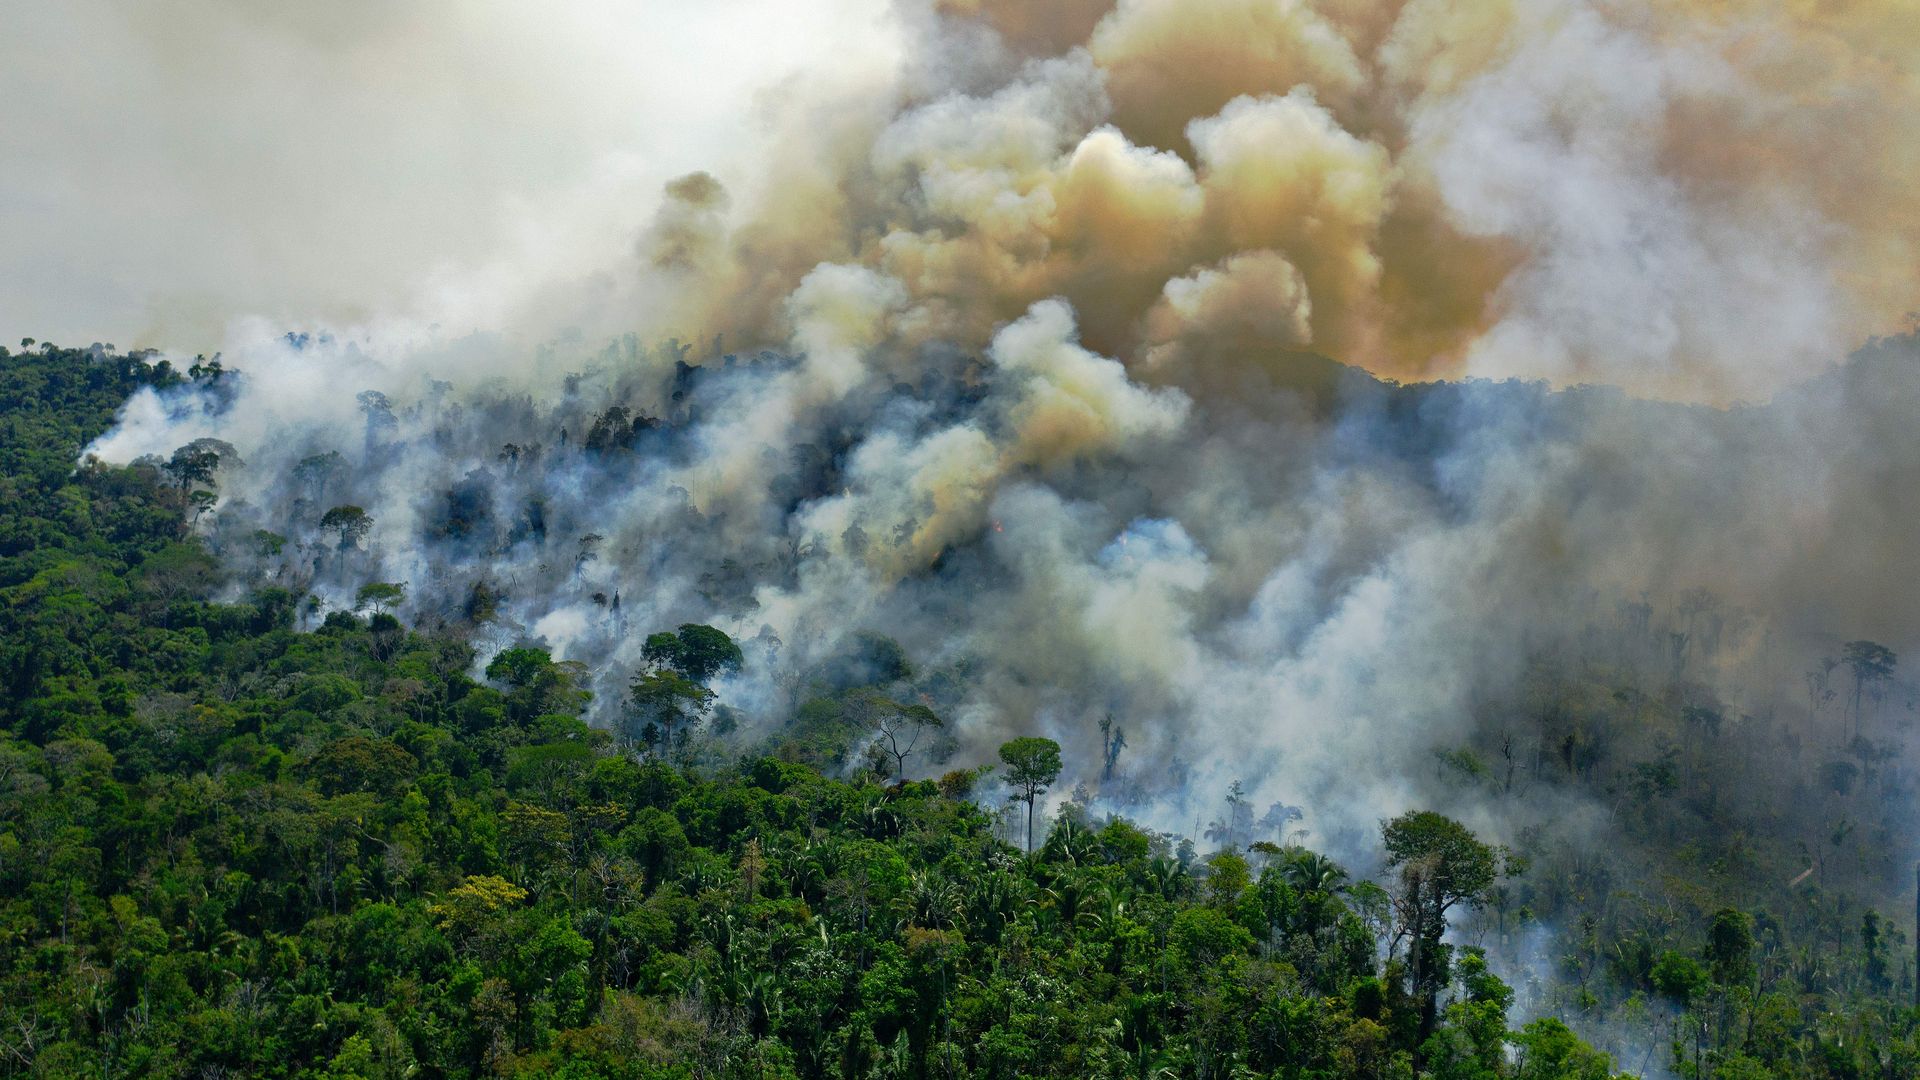 Part of the Amazon Rainforest south of Novo Progresso burning in August 2020.